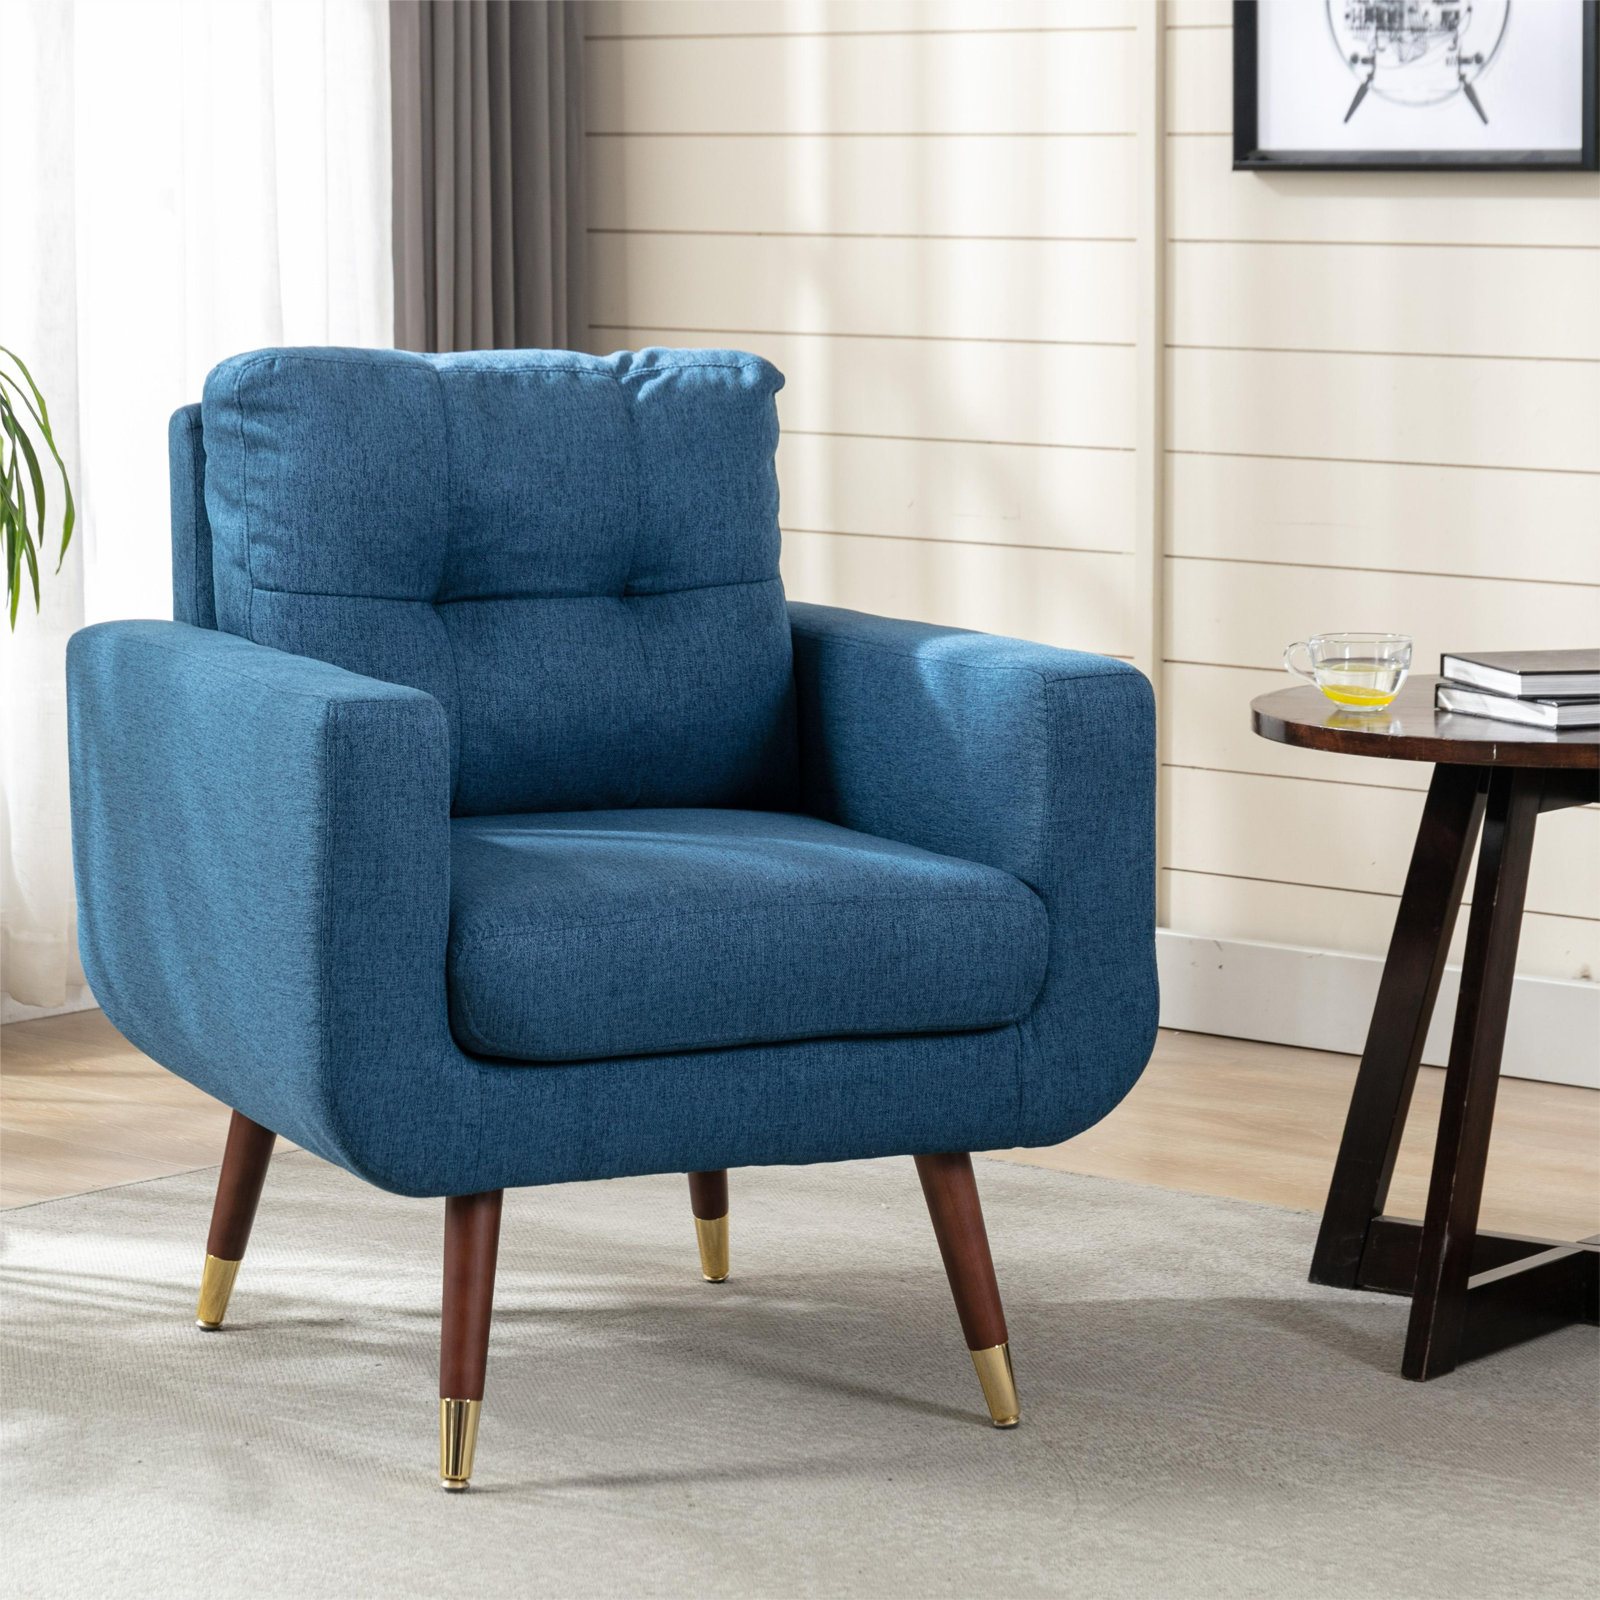 28" Kenrik Tufted Polyester Armchair w/ Metal Foot Guards (Various Colors) $70 + Free Shipping